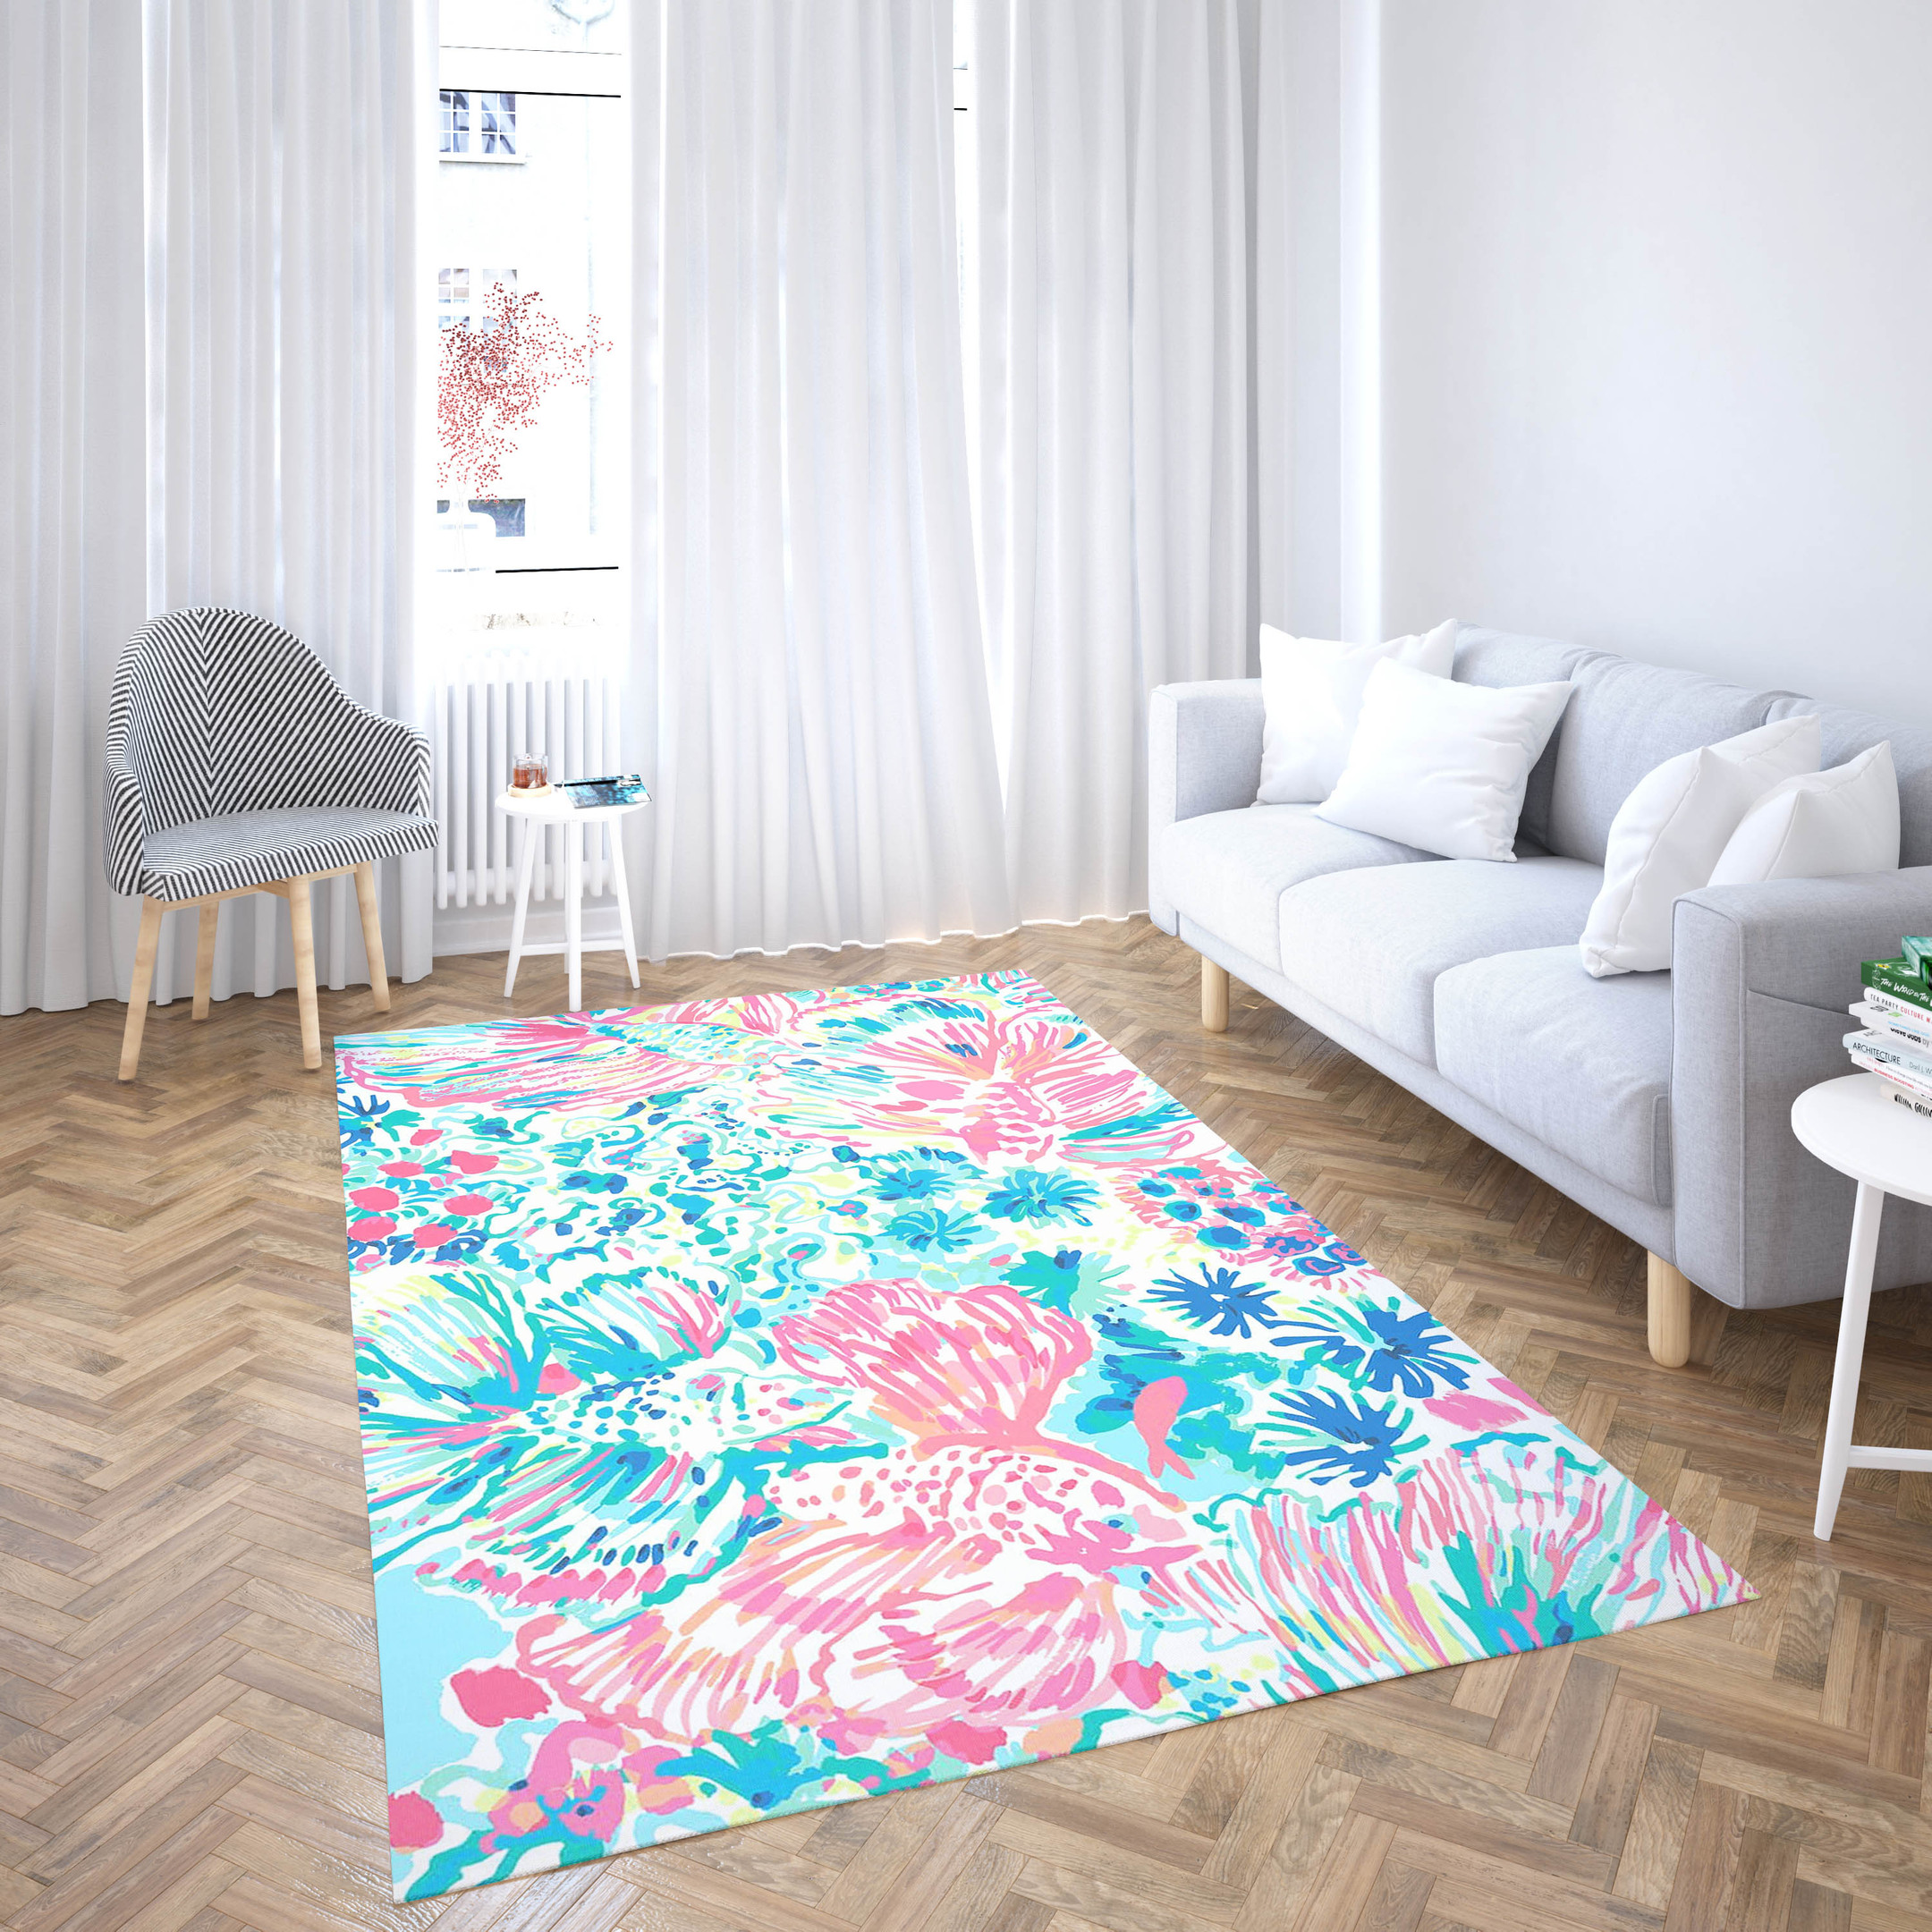 Cool Rugs Gypsea Lilly Pulitzer Rug Rectangle Washable Area Non Slip Carpet For Living Room Bedroom Aeticon Print